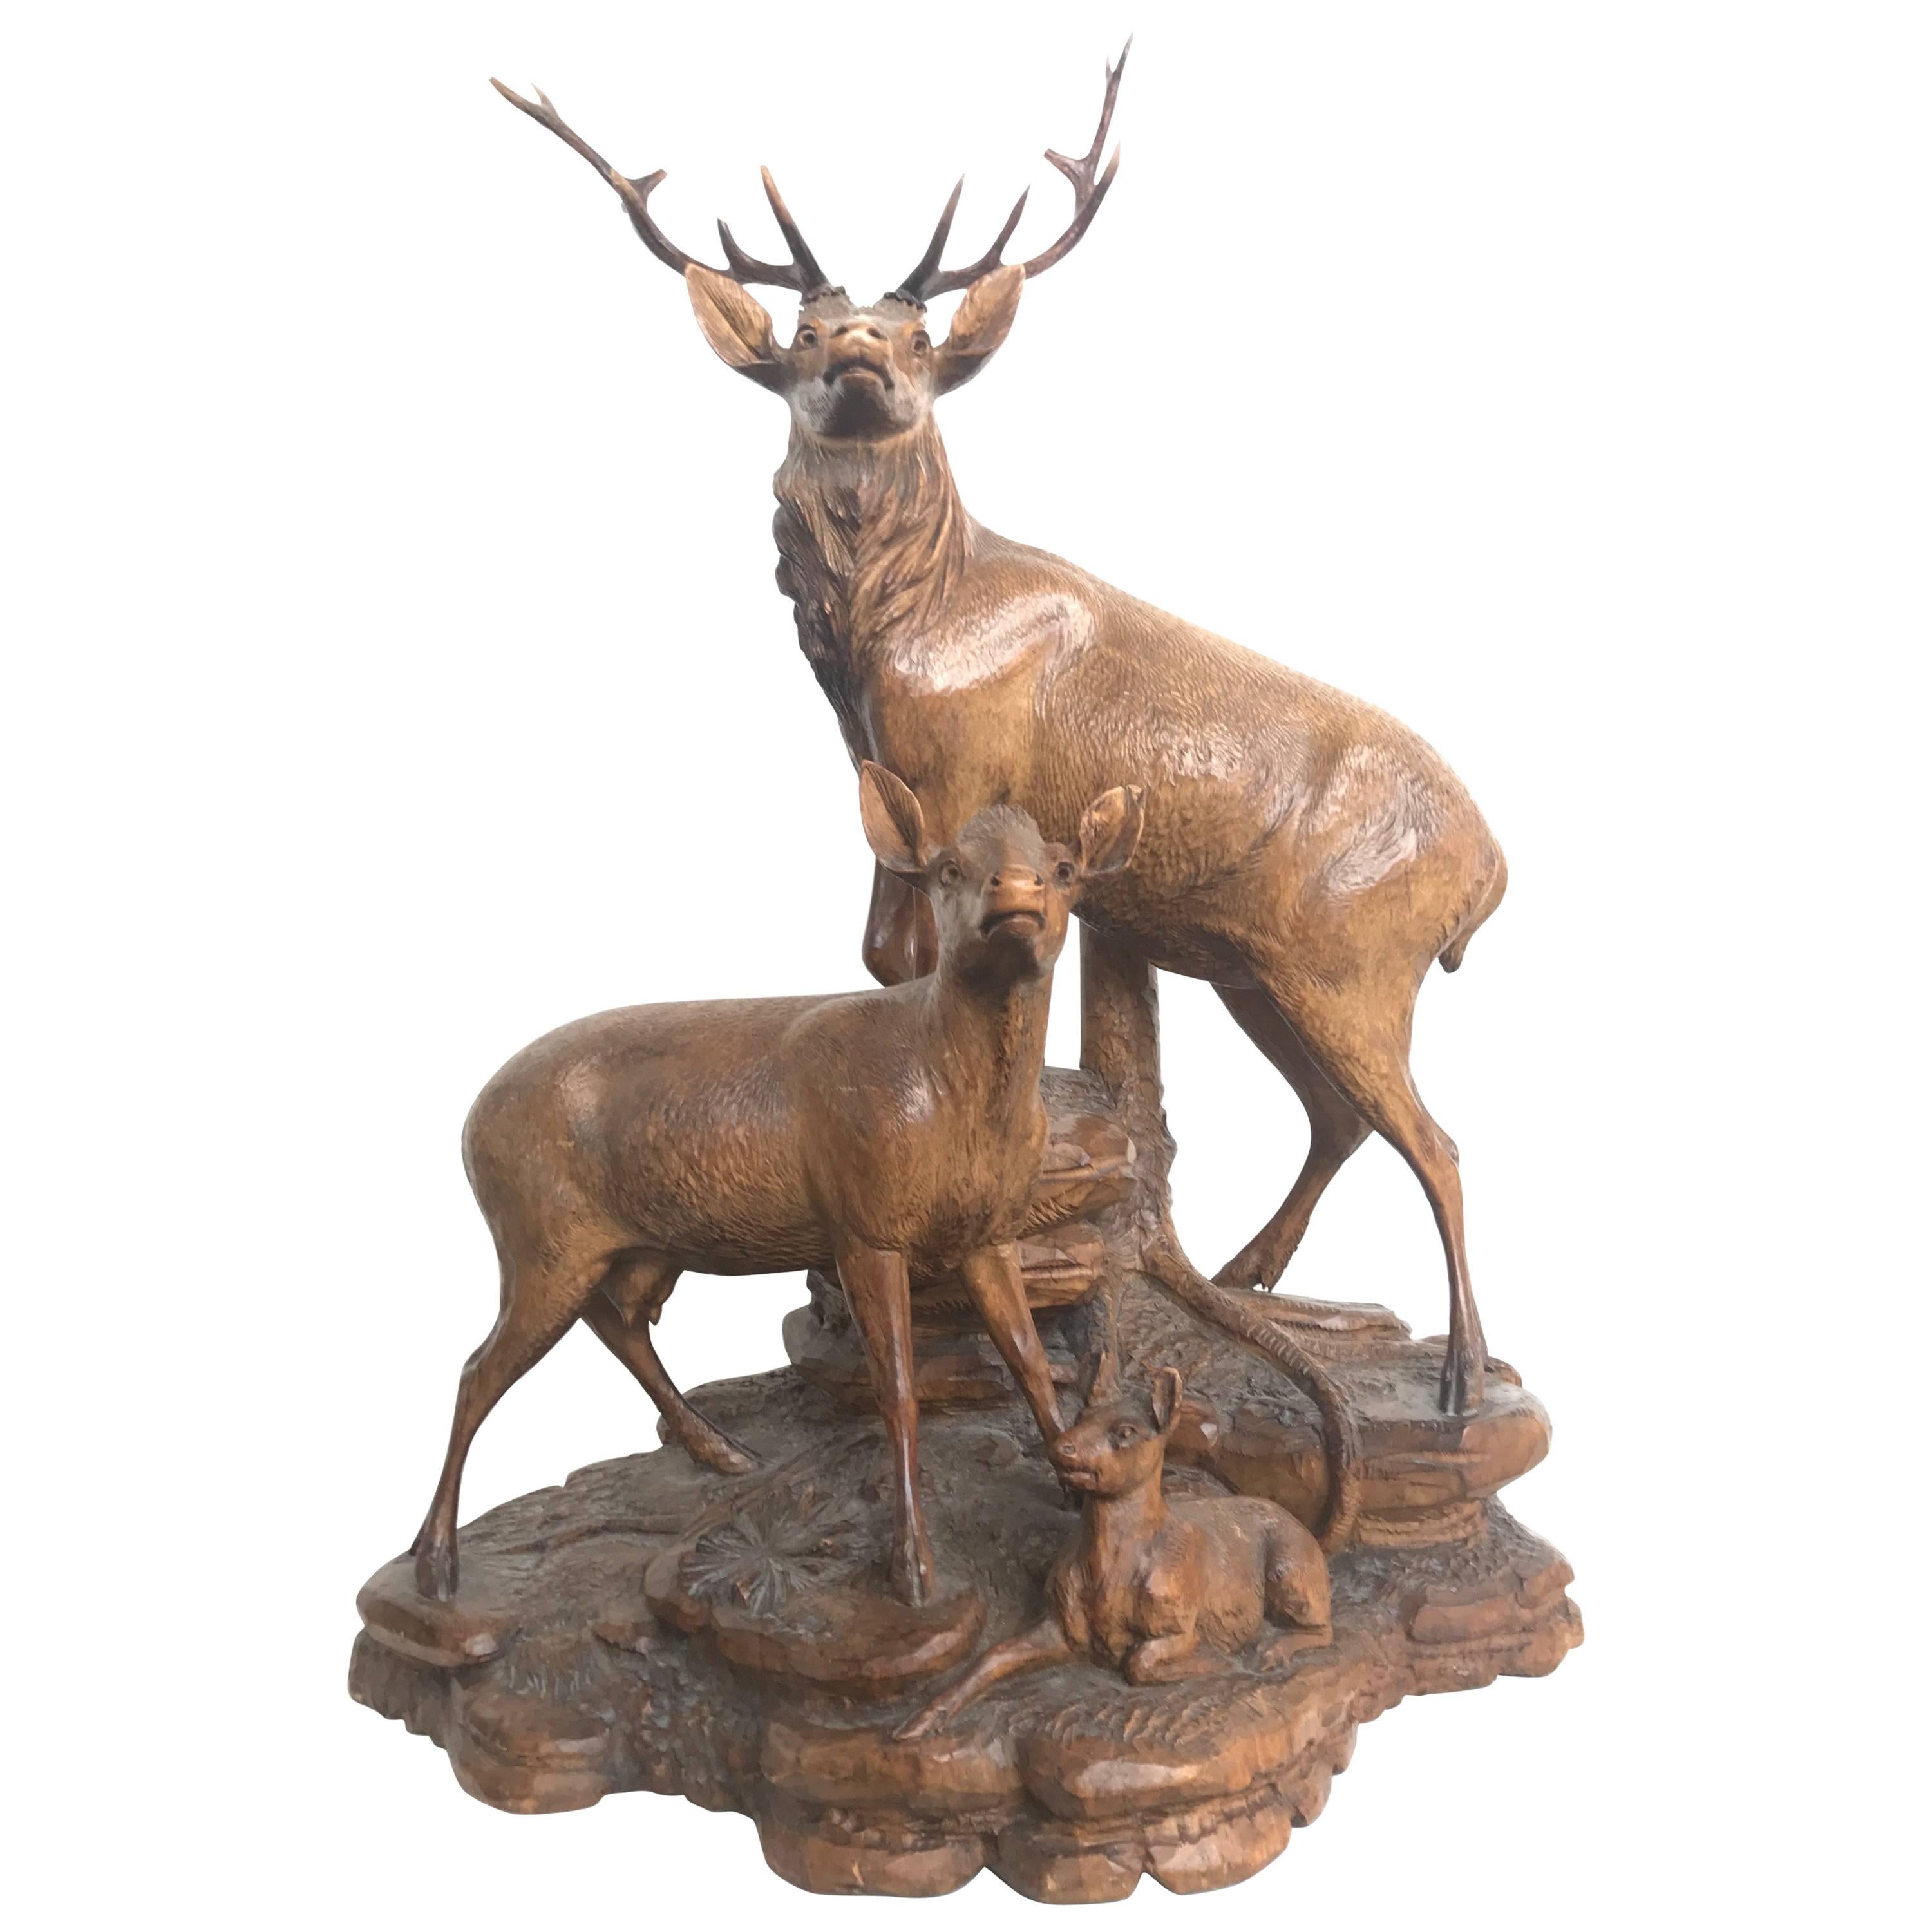 Antique and Large Hand-Carved Black Forest Walnut Deer Family Sculpture Statue